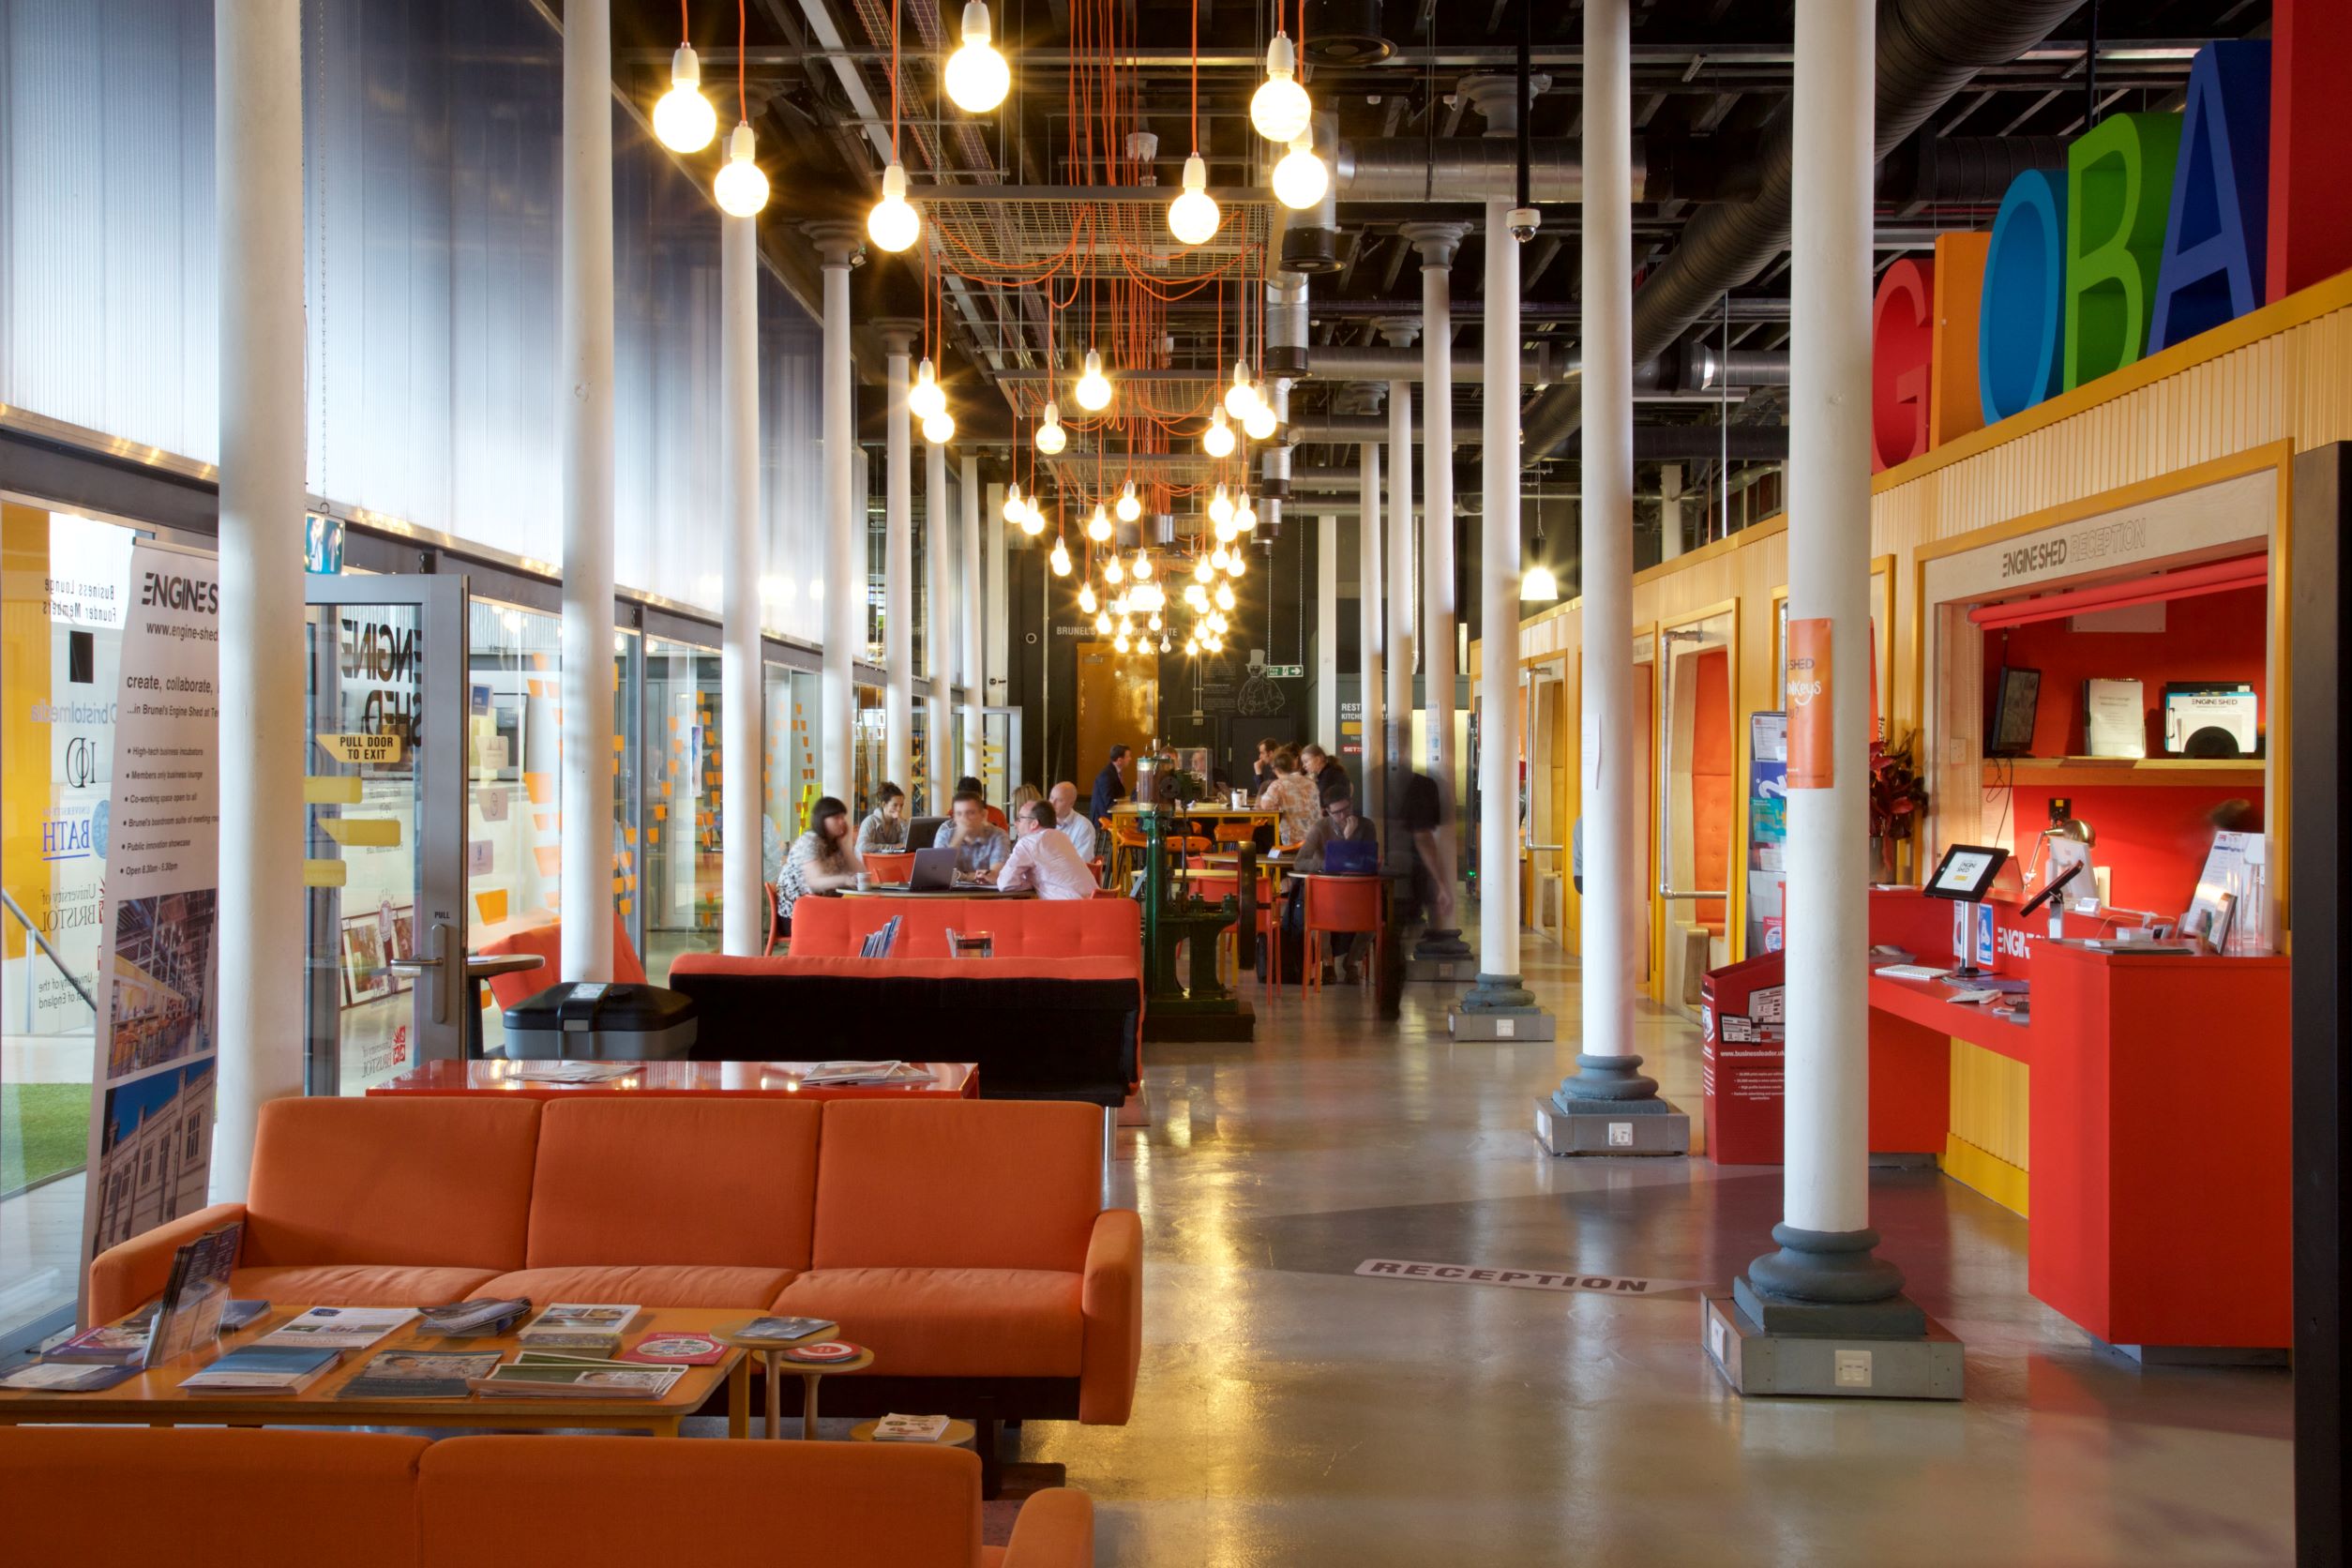 People sitting and working in the bright and colourful Engine Shed shared workspace